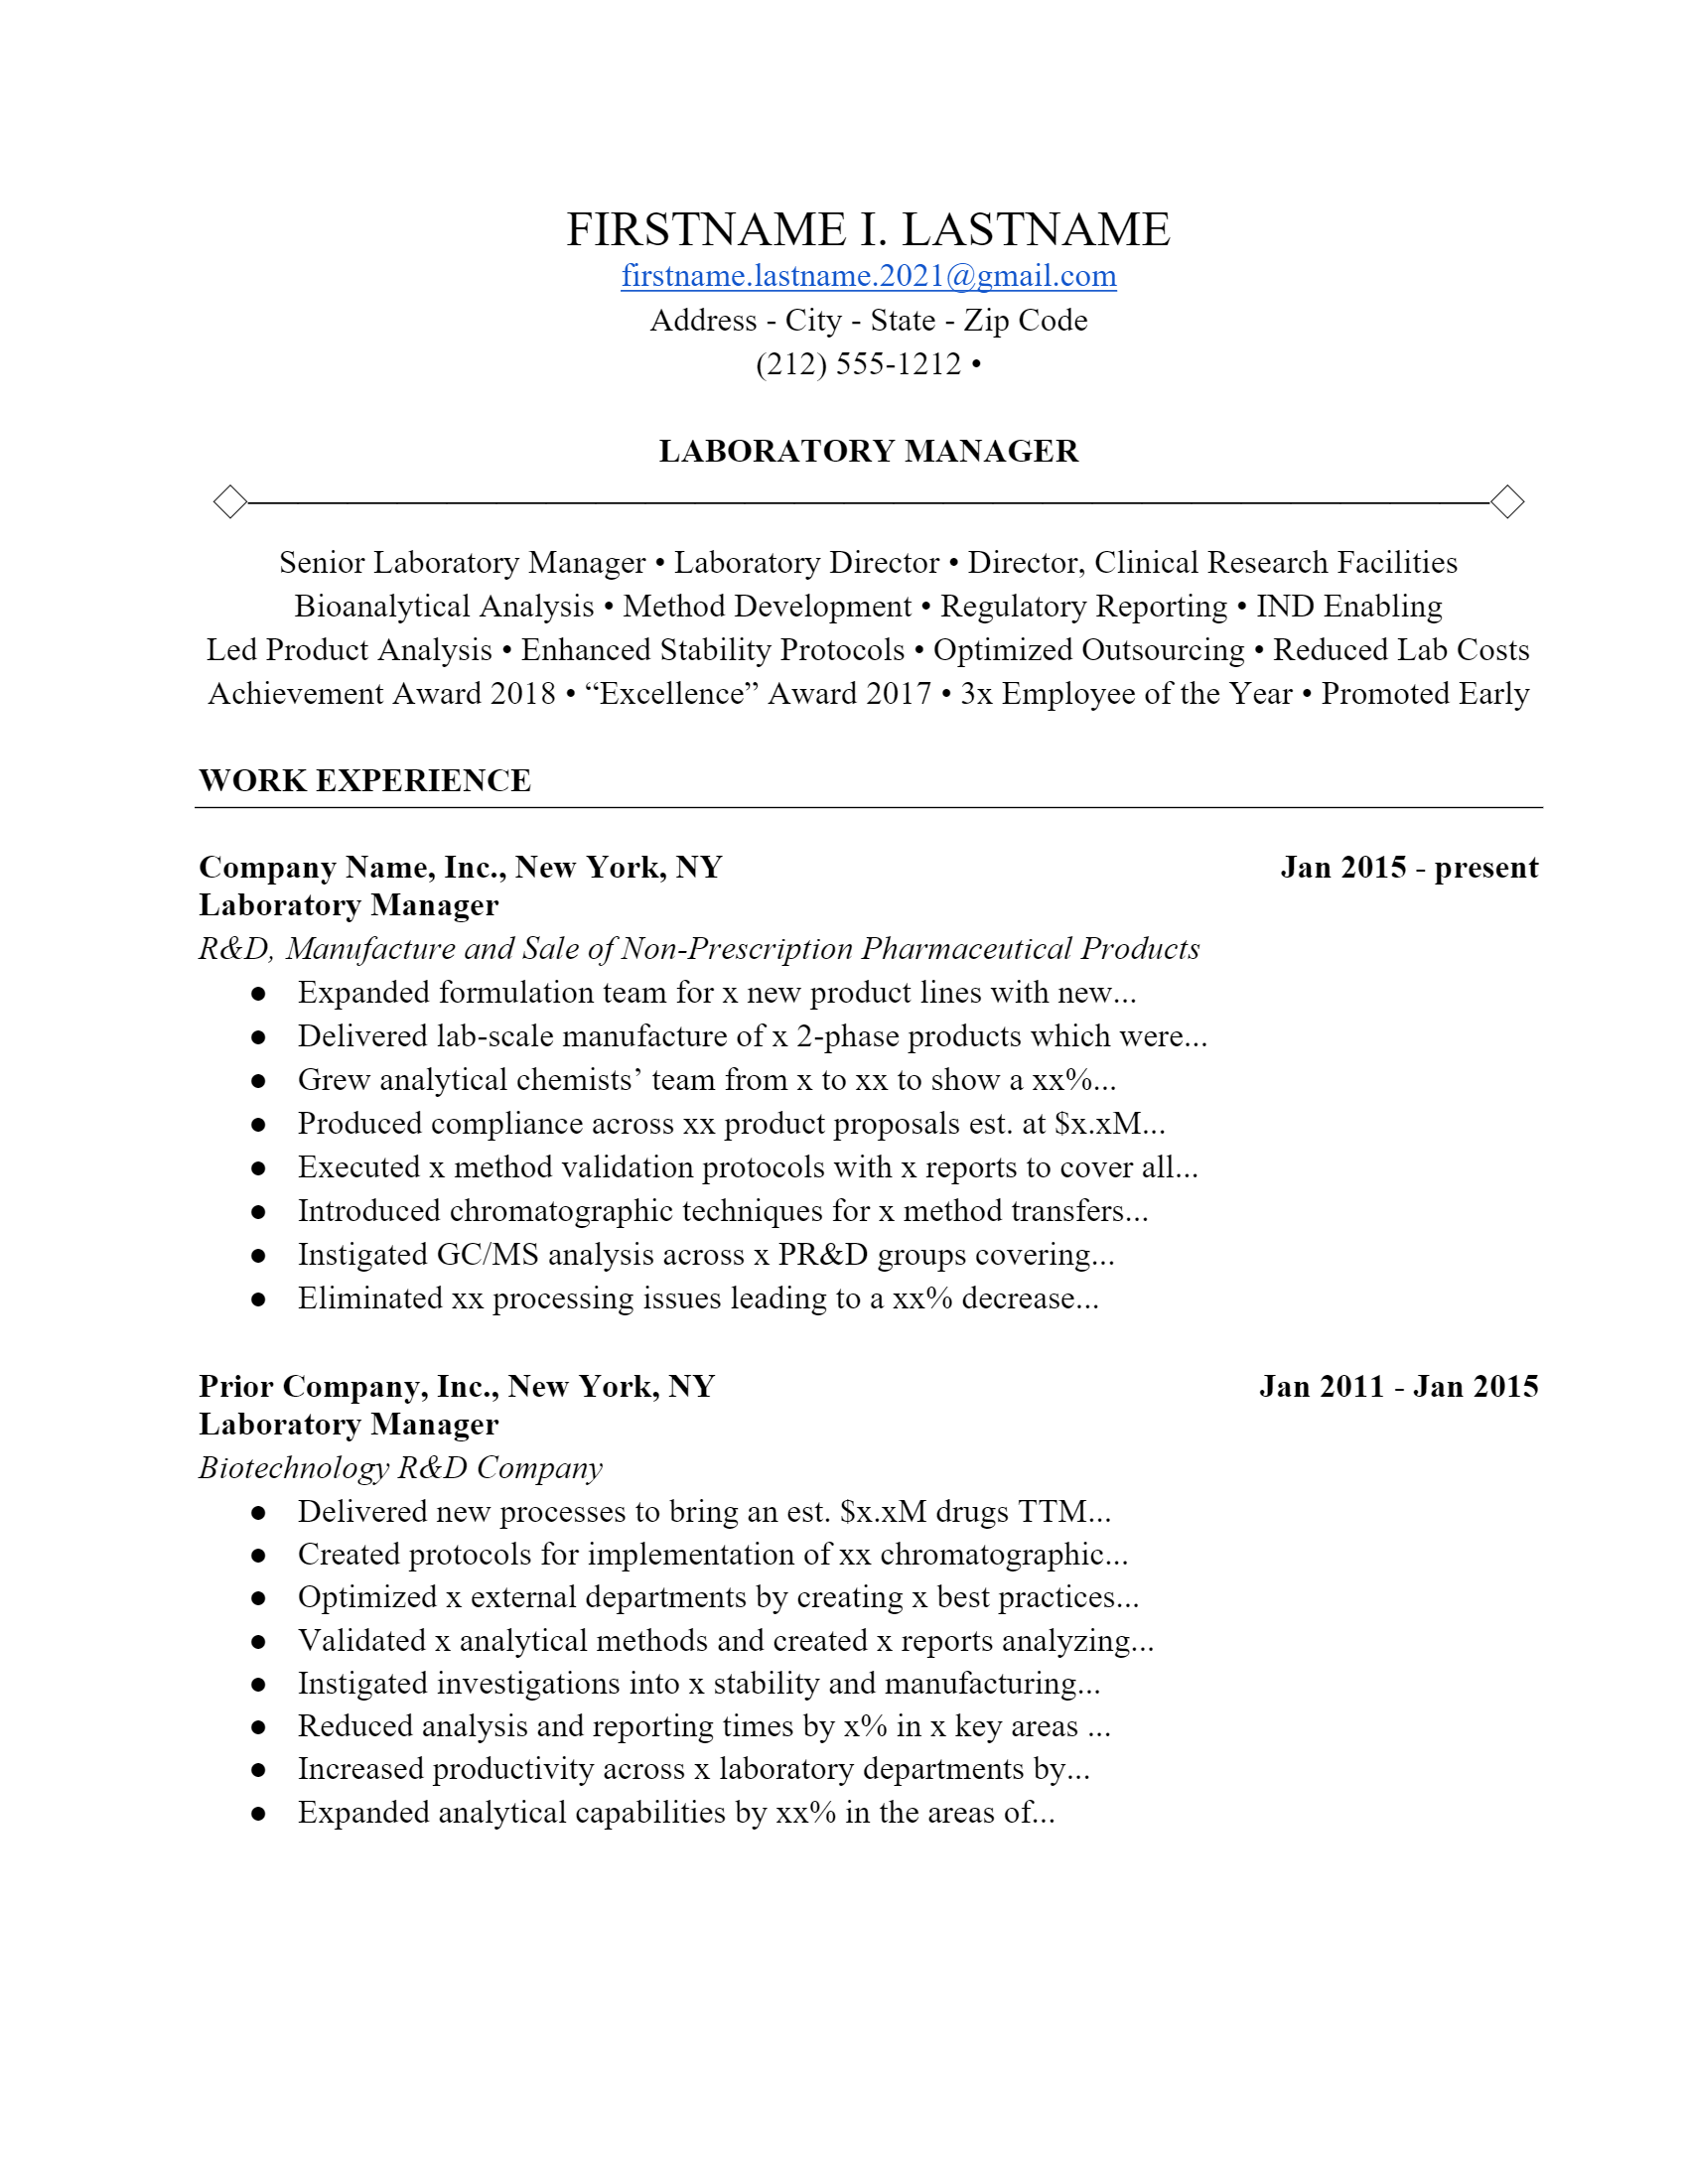 Lab Manager Resume .Docx (Word)